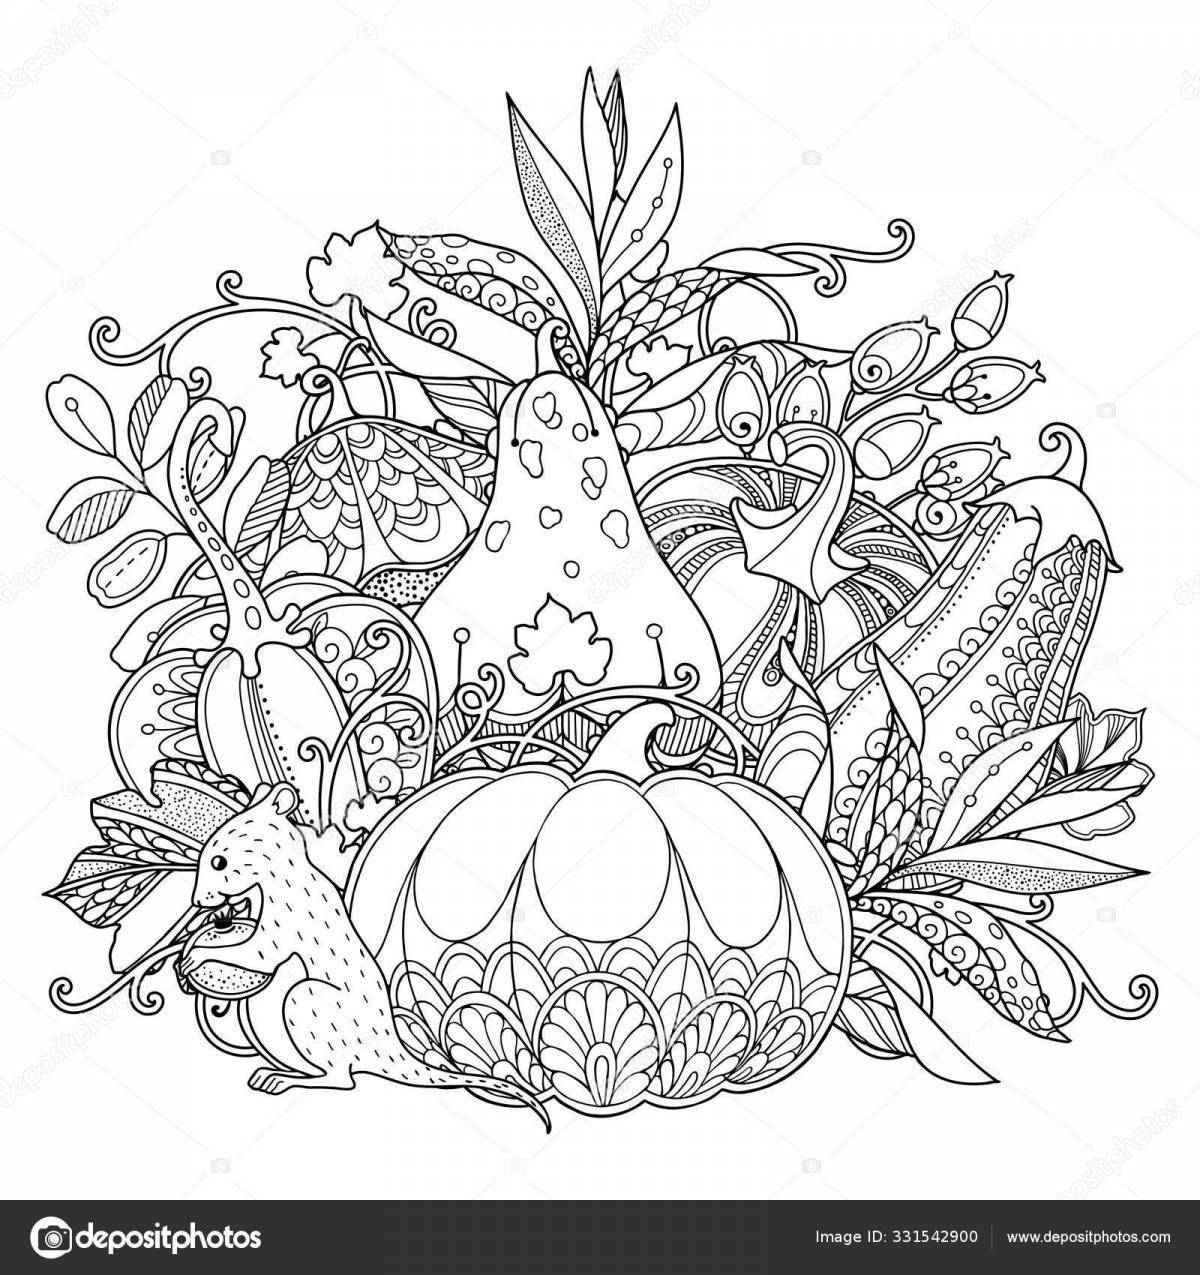 Exquisite antistress fruit coloring book